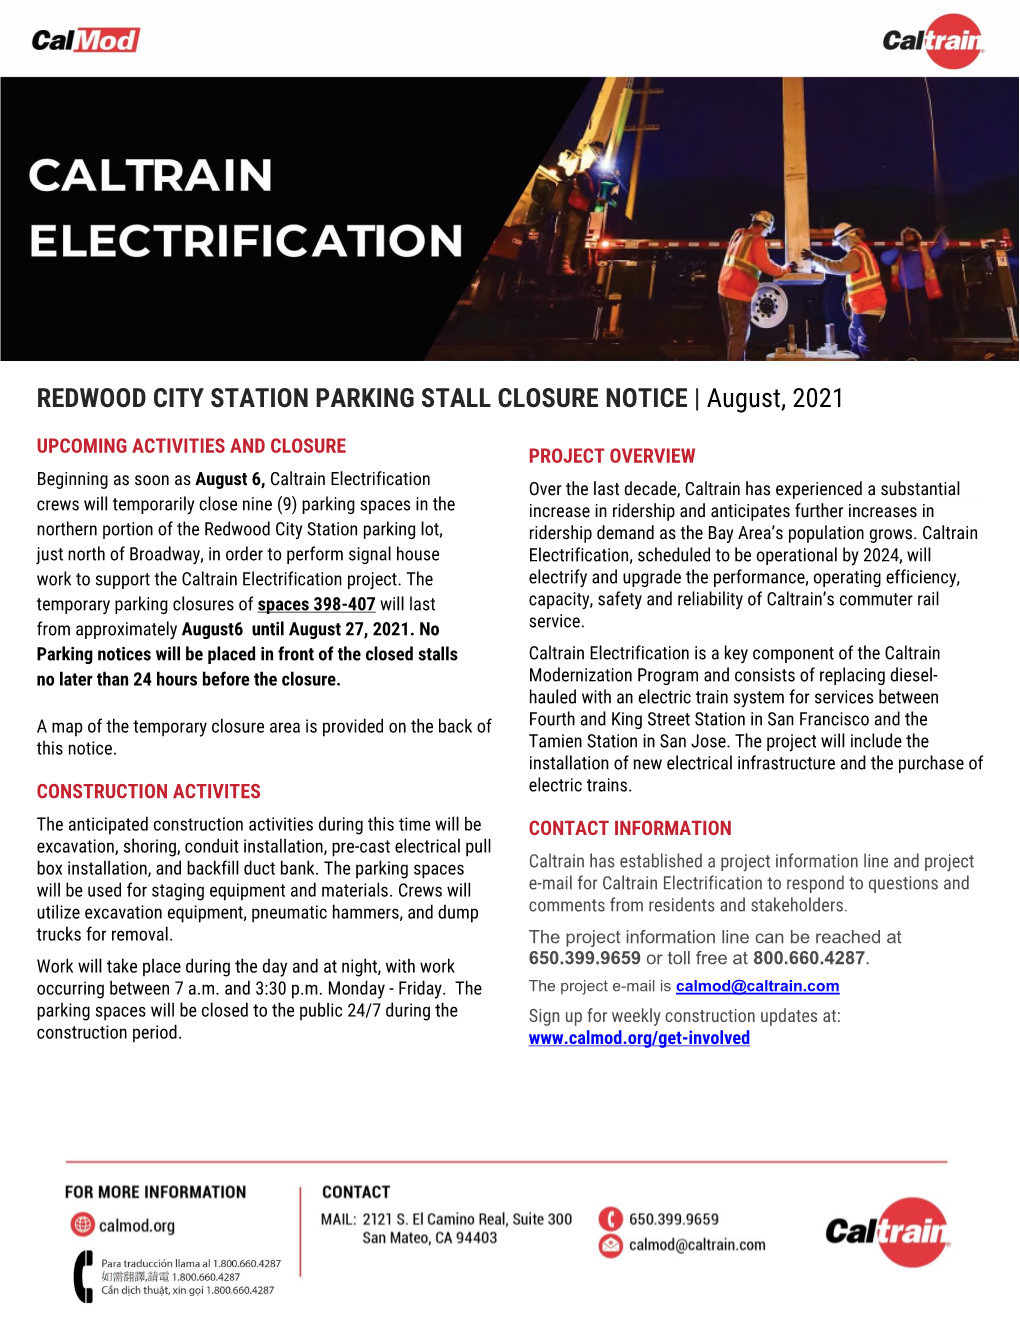 REDWOOD CITY STATION PARKING STALL CLOSURE NOTICE | August, 2021